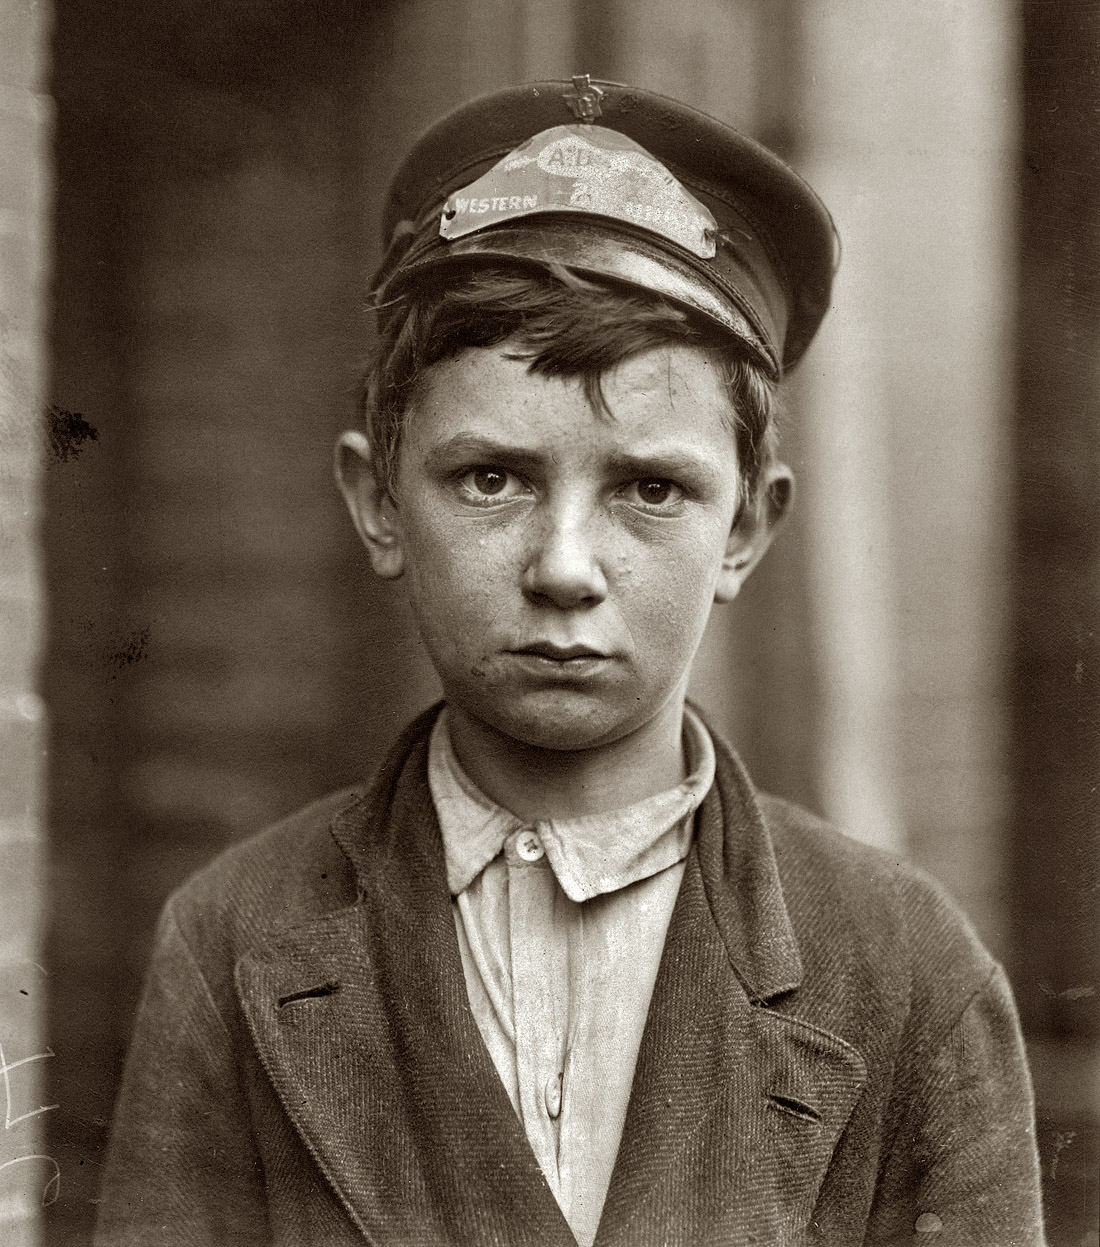 May 1910. Wilmington, Delaware. Richard Pierce, 723 Walnut Street. Fourteen years of age. Western Union Telegraph Messenger No. 2. Nine months in service. Works from 7 a.m. to 6 p.m. Smokes. Visits houses of prostitution. Investigator, Edward F. Brown. View full size. Photo and caption by Lewis Wickes Hine.